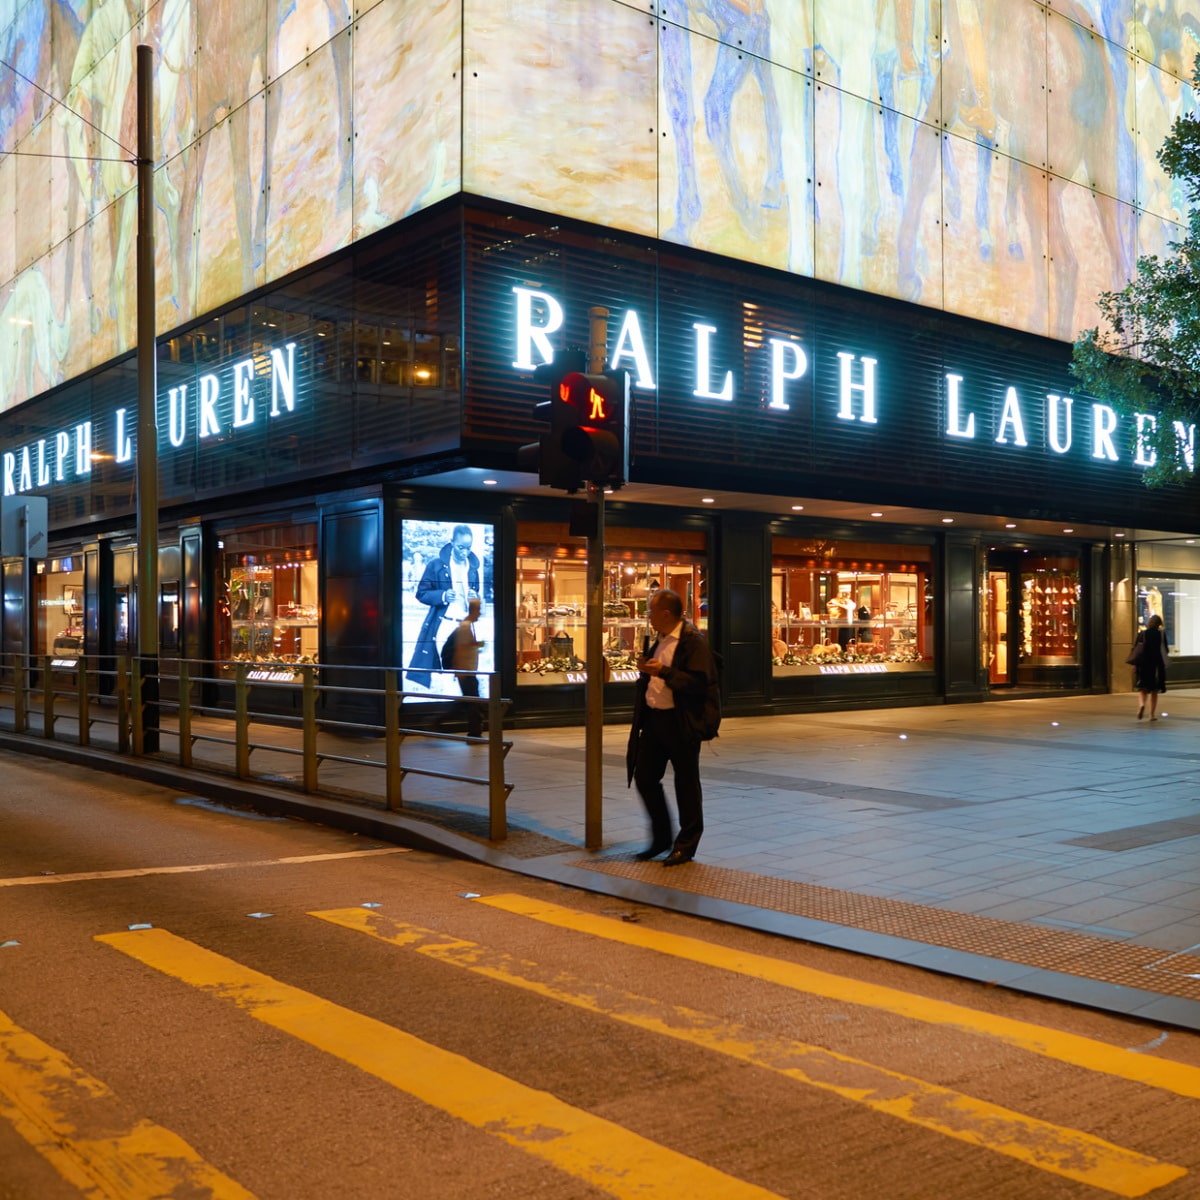 Which brand makes the best quality men's clothing, Ralph Lauren